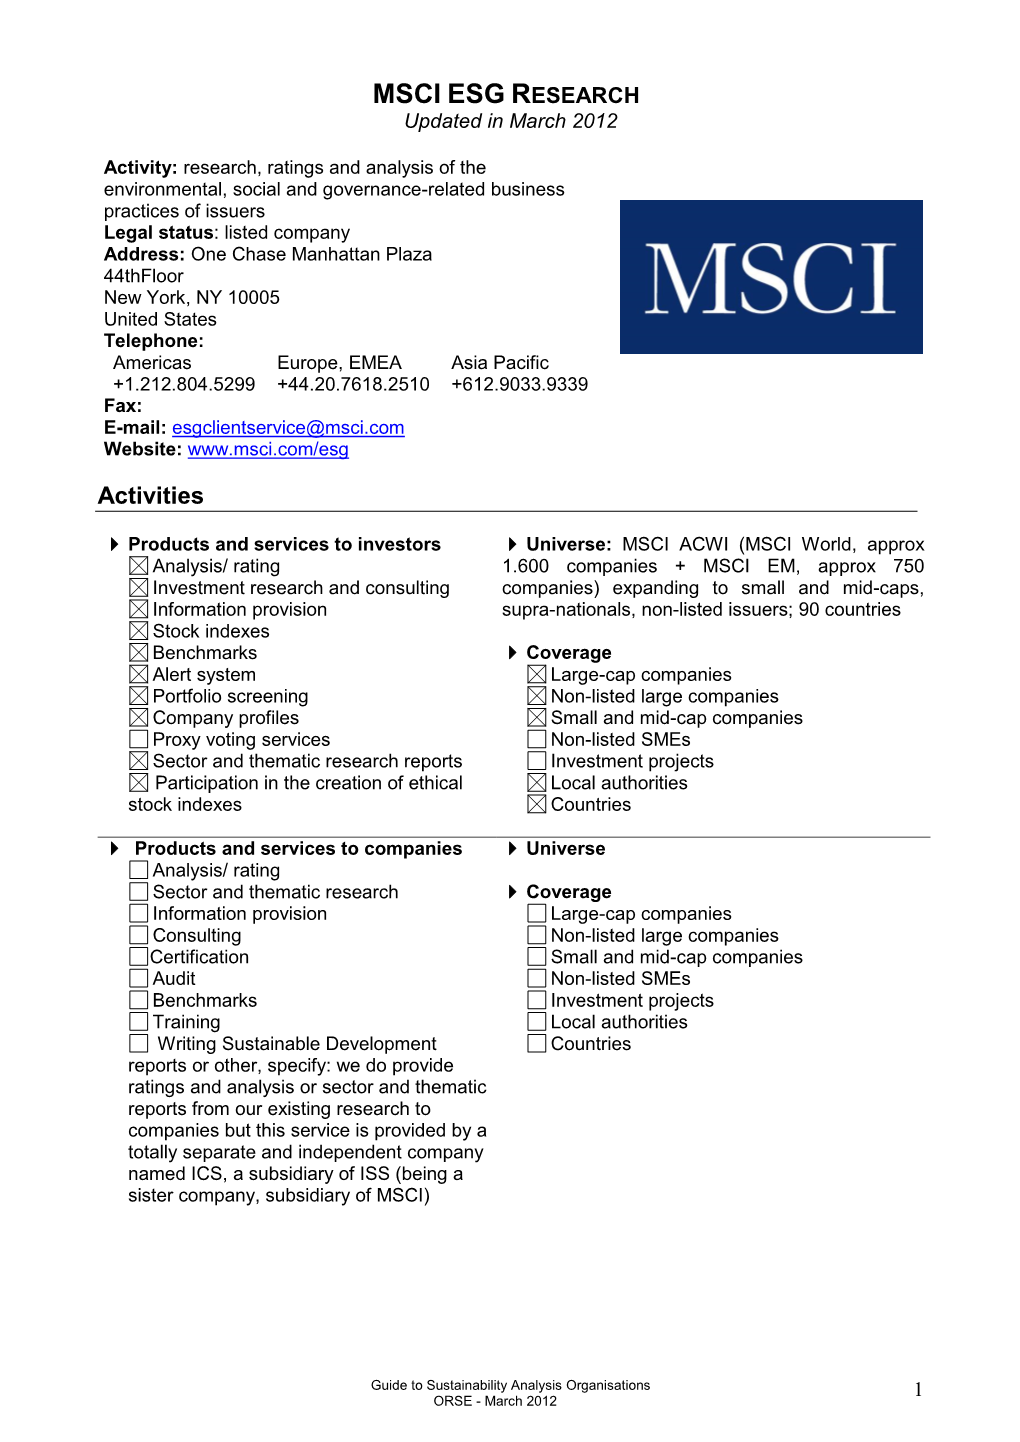 MSCI ESG RESEARCH Updated in March 2012